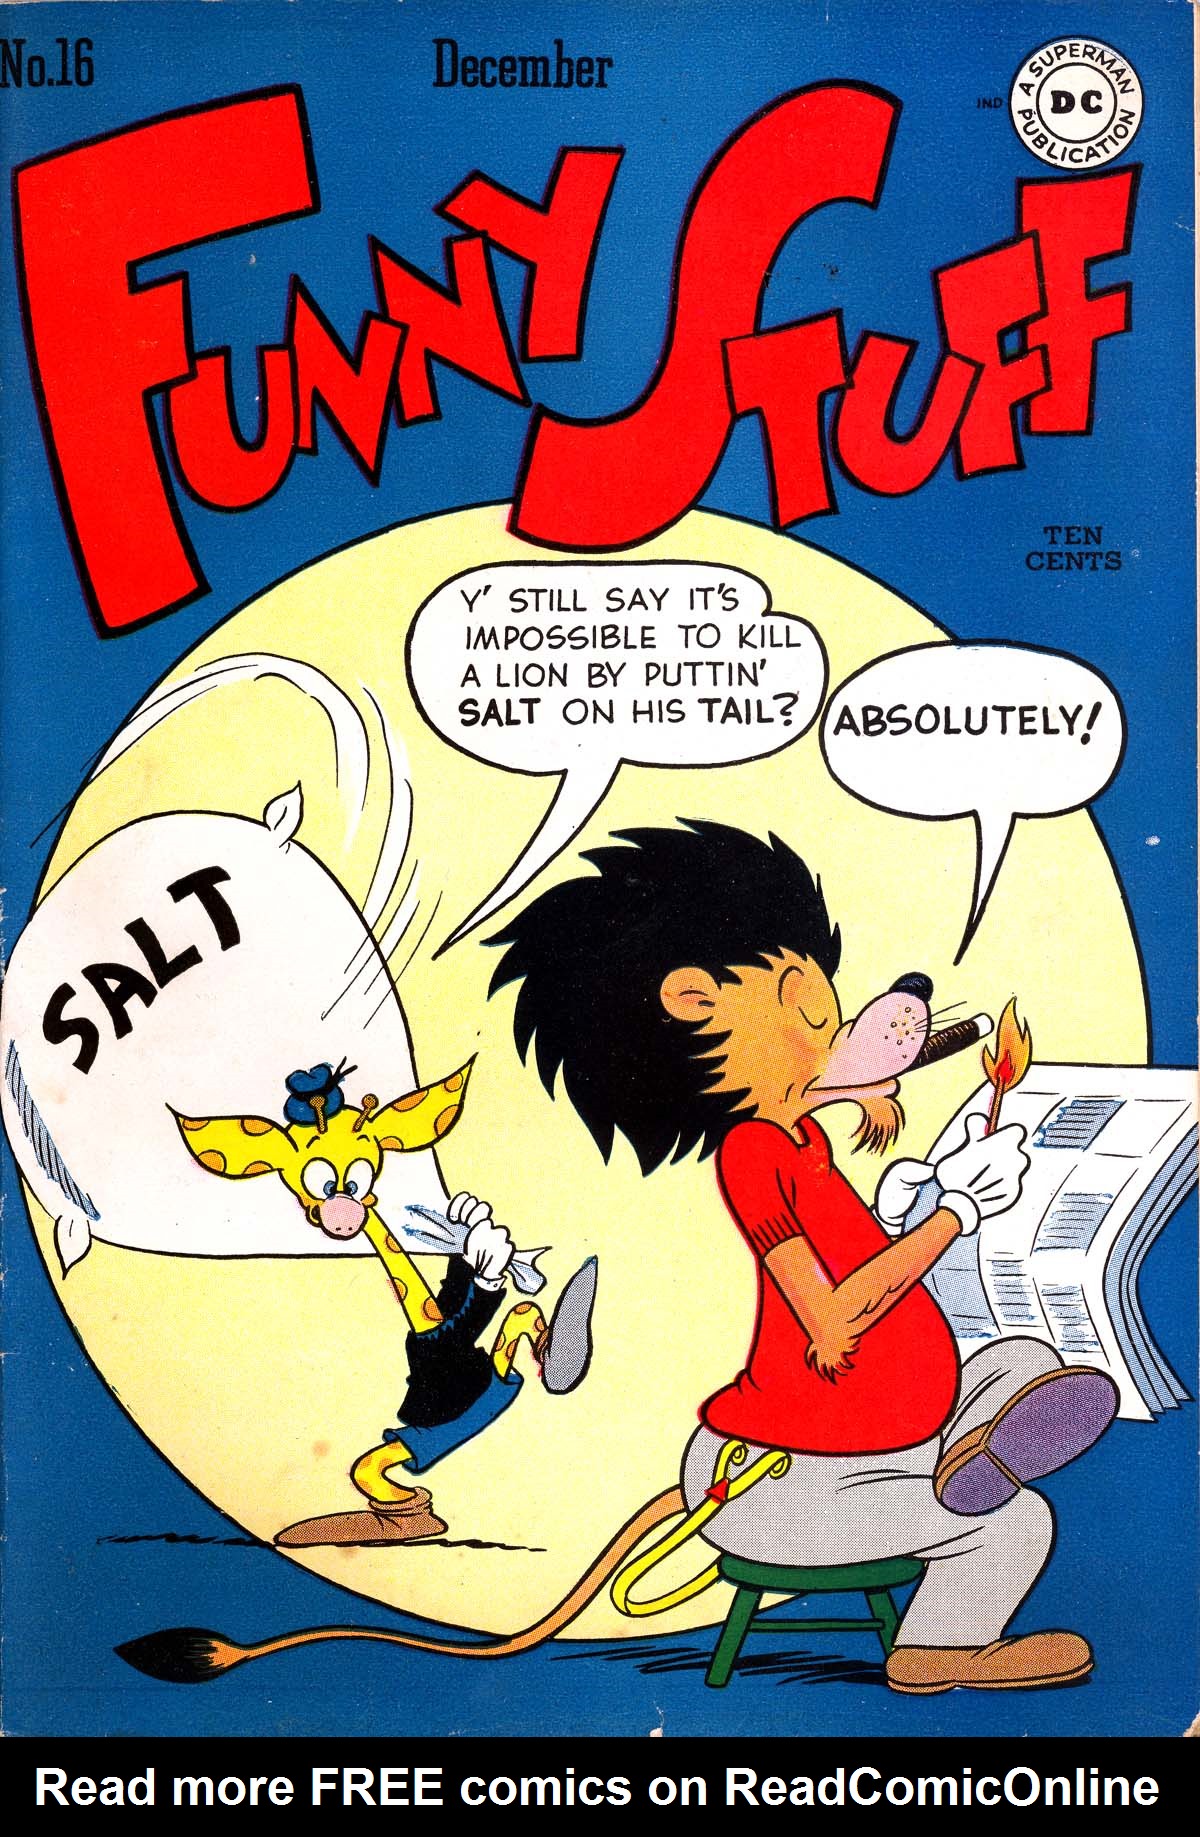 Read online Funny Stuff comic -  Issue #16 - 1